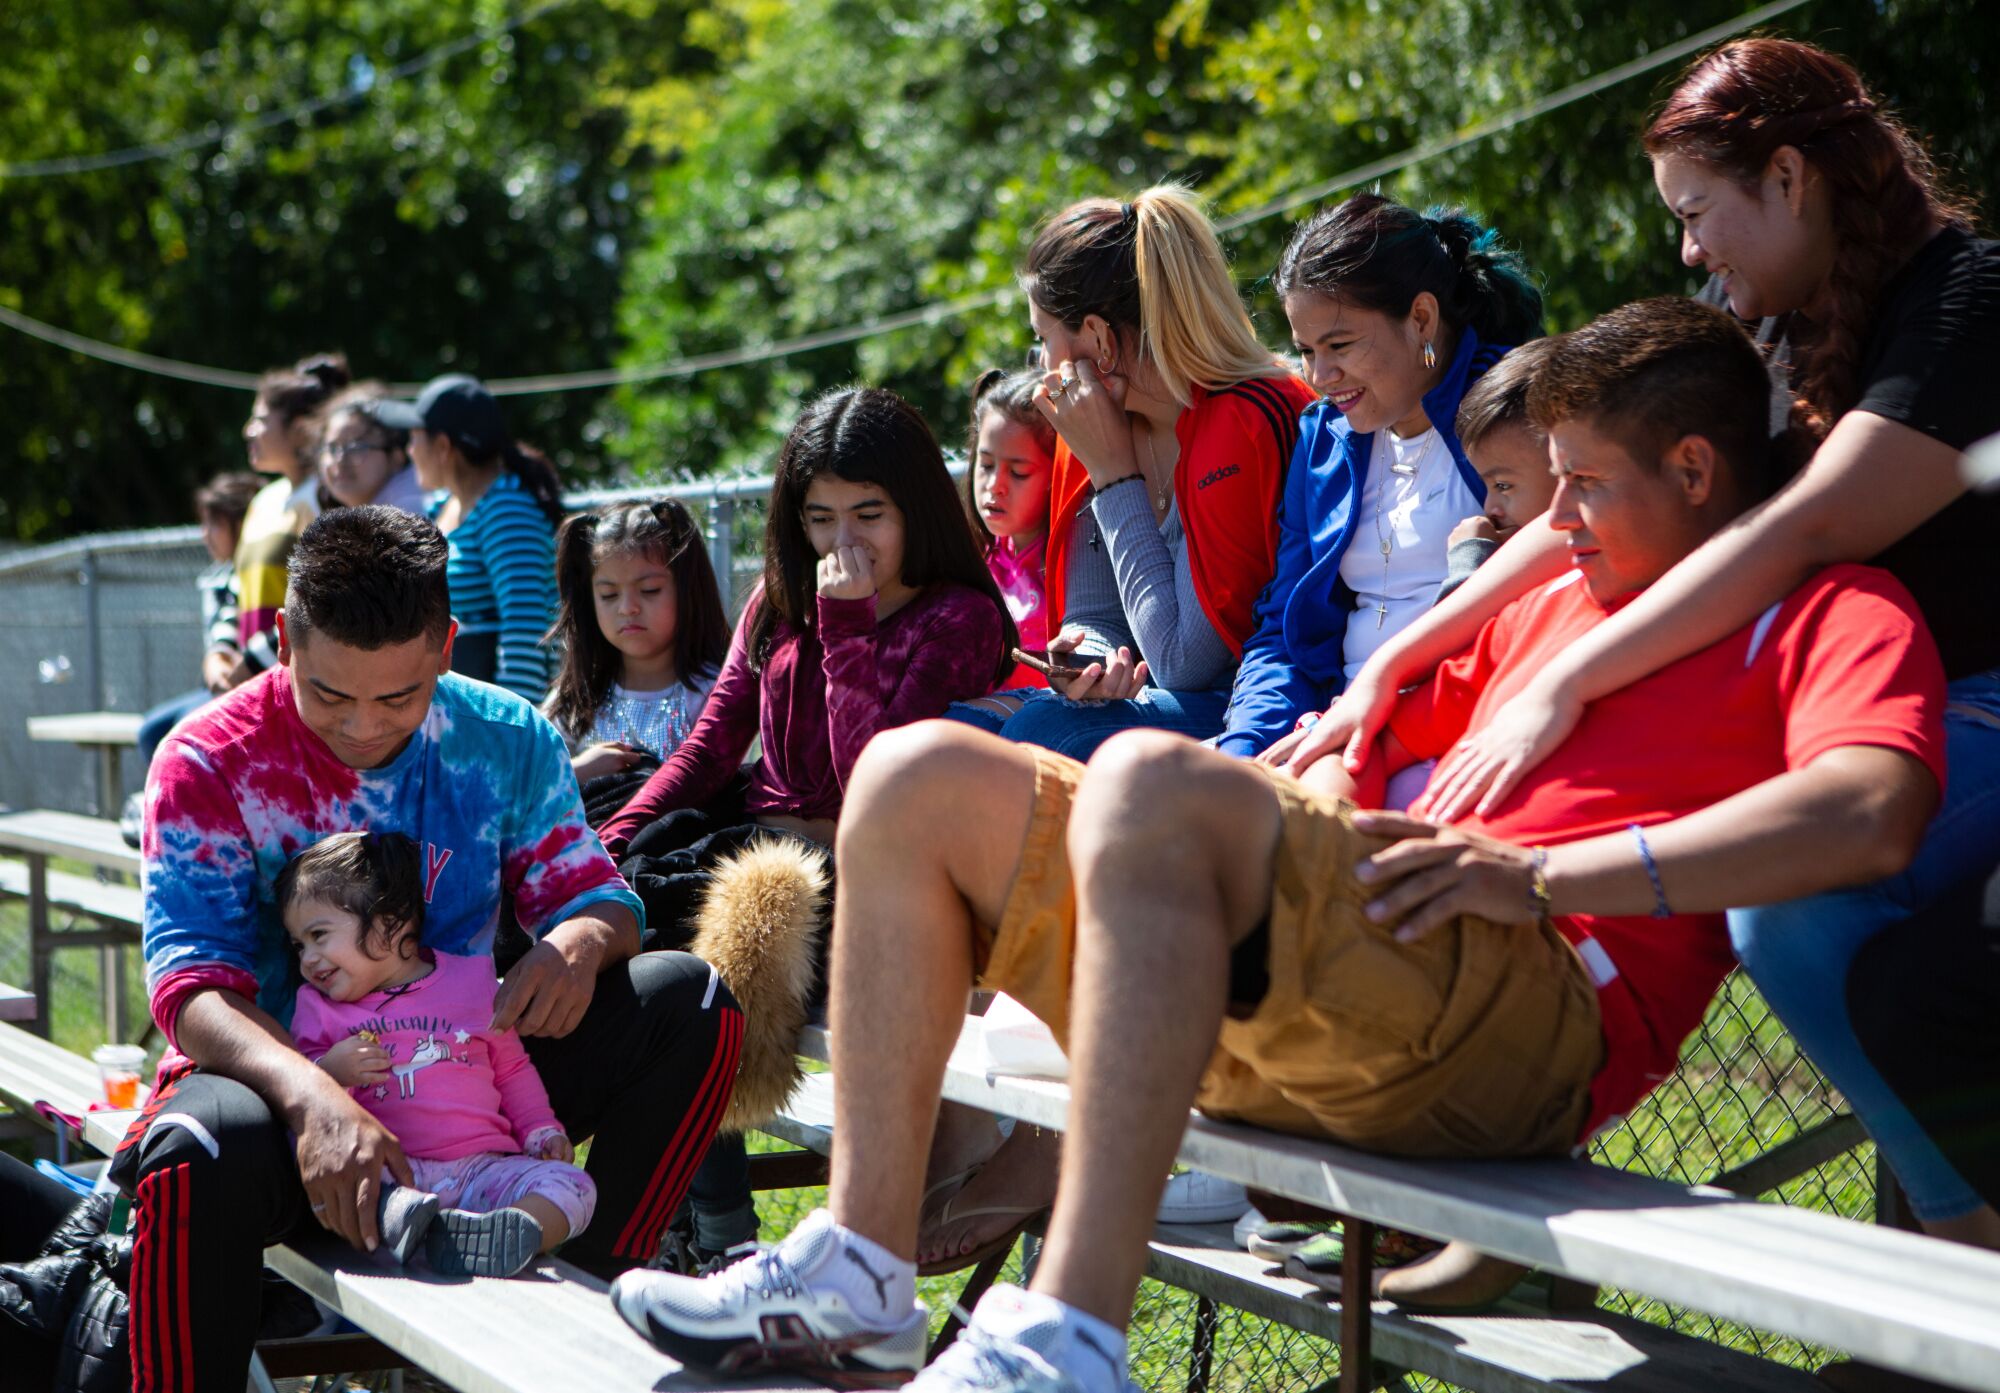 Families gather to enjoy a soccer game in Raleigh, N.C.